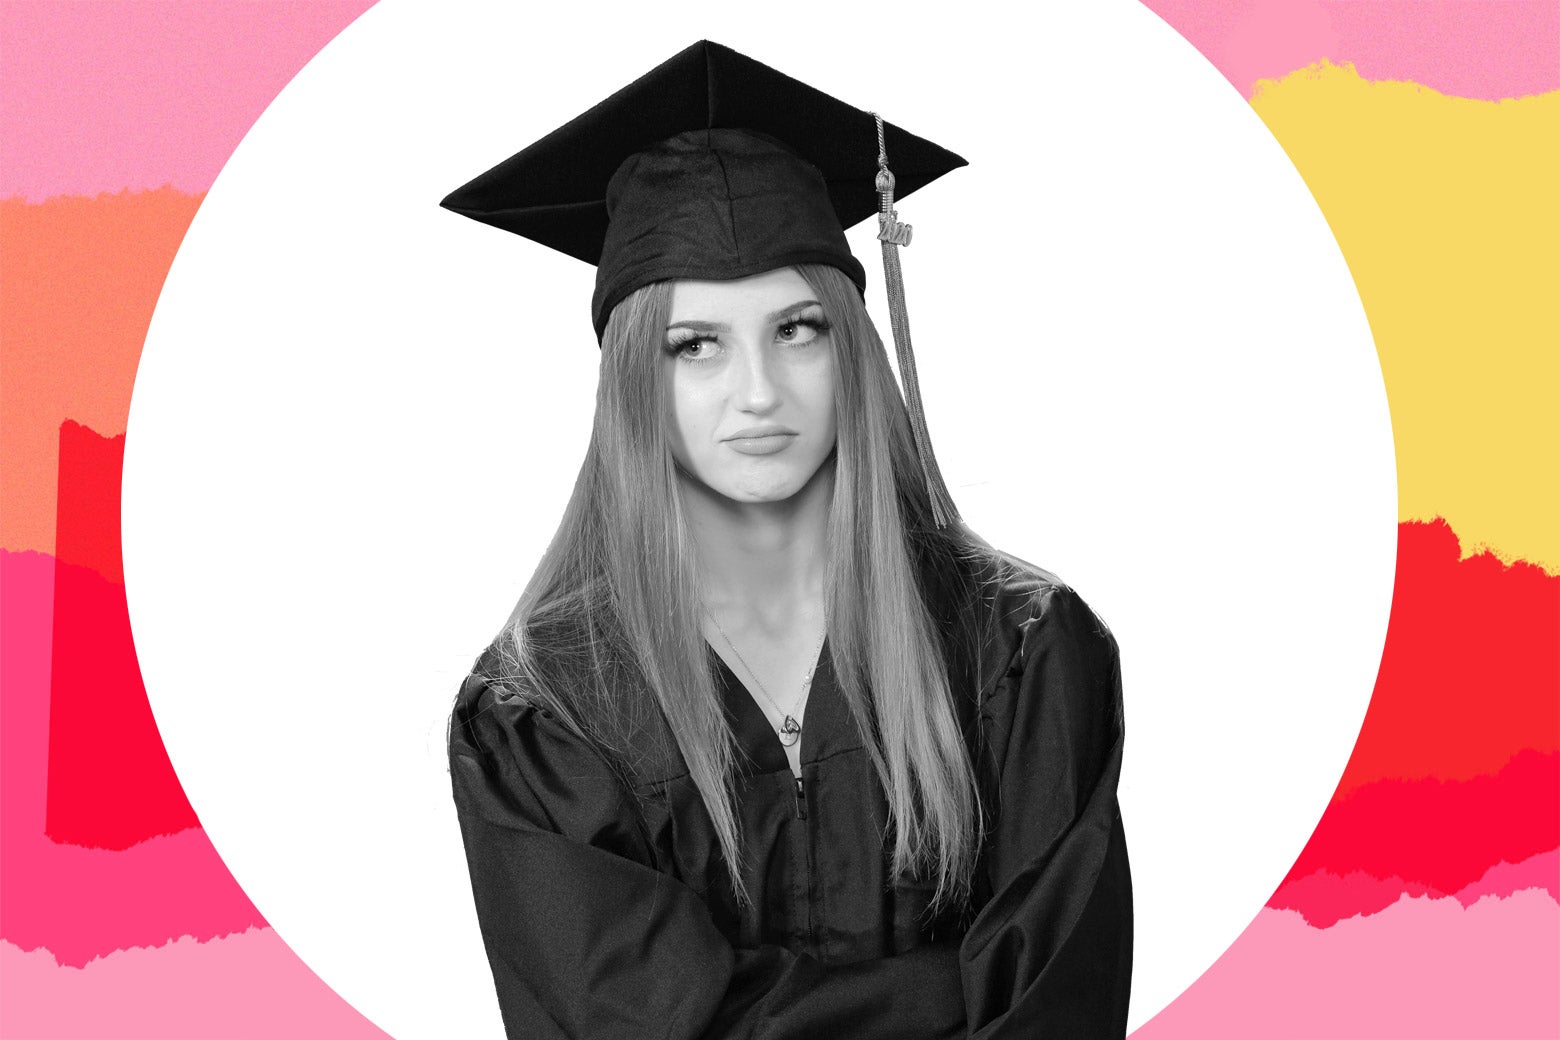 A young woman in cap and gown looks annoyed.